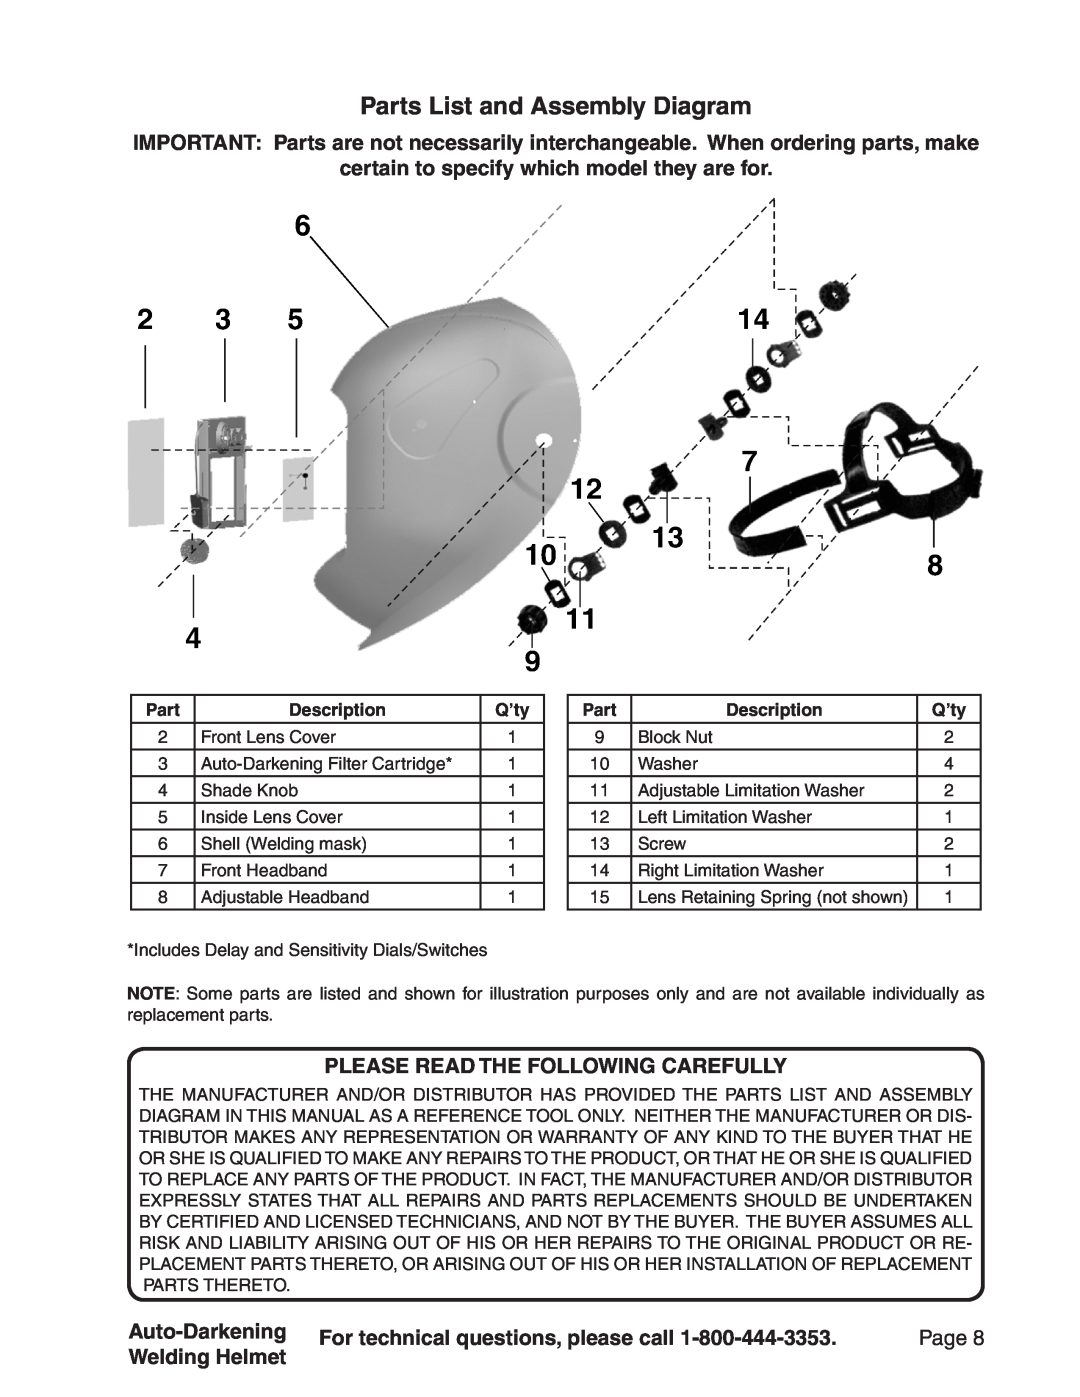 Harbor Freight Tools 94337 Parts List and Assembly Diagram, certain to specify which model they are for, Auto-Darkening 